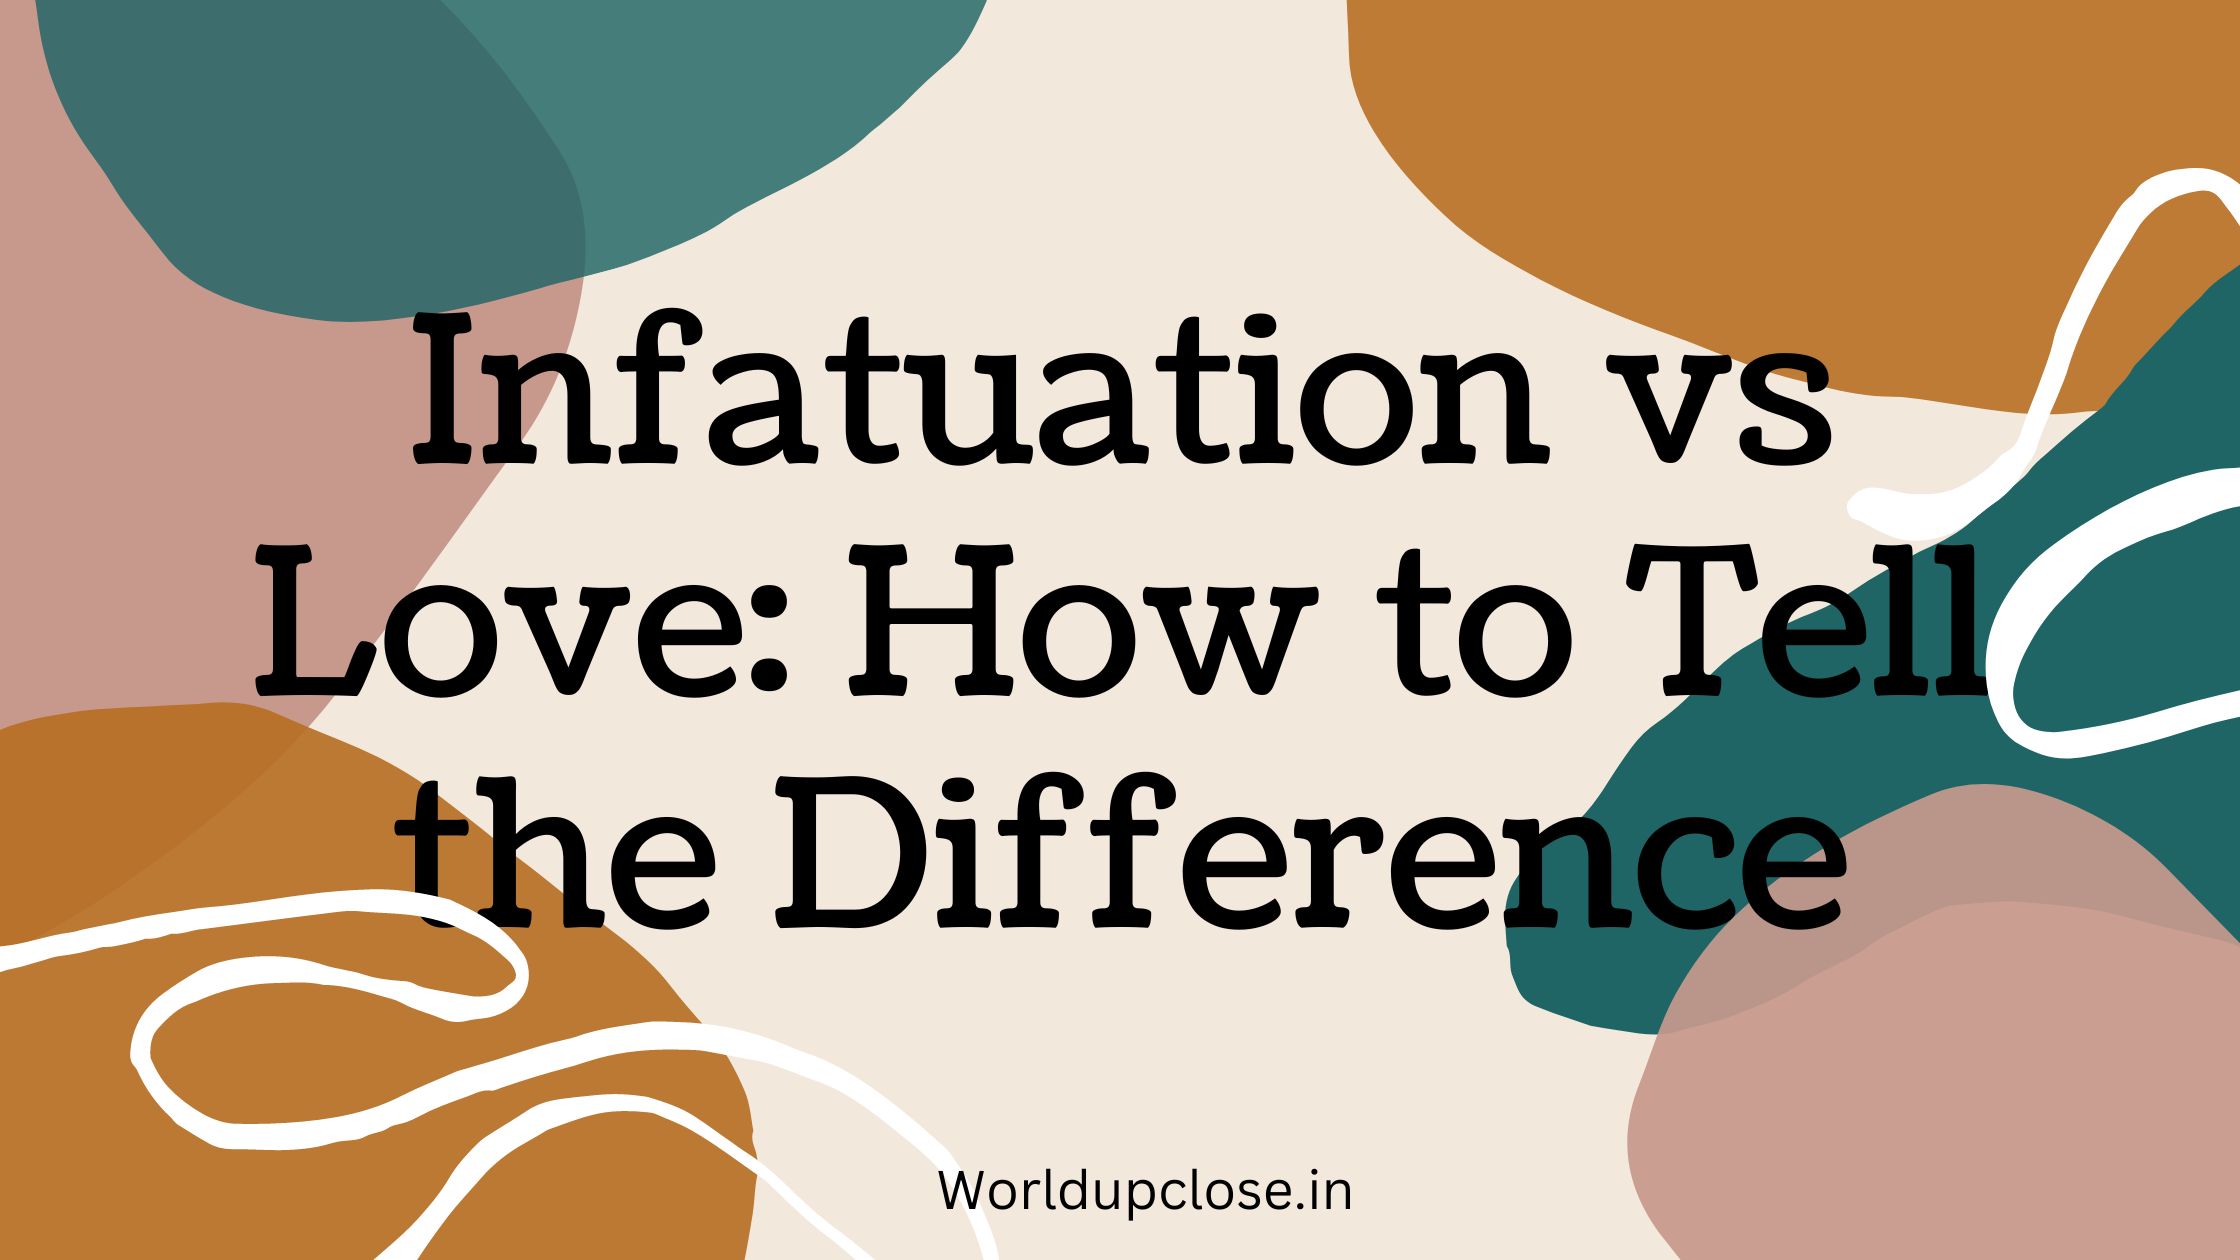 Infatuation vs Love: How to Tell the Difference 20